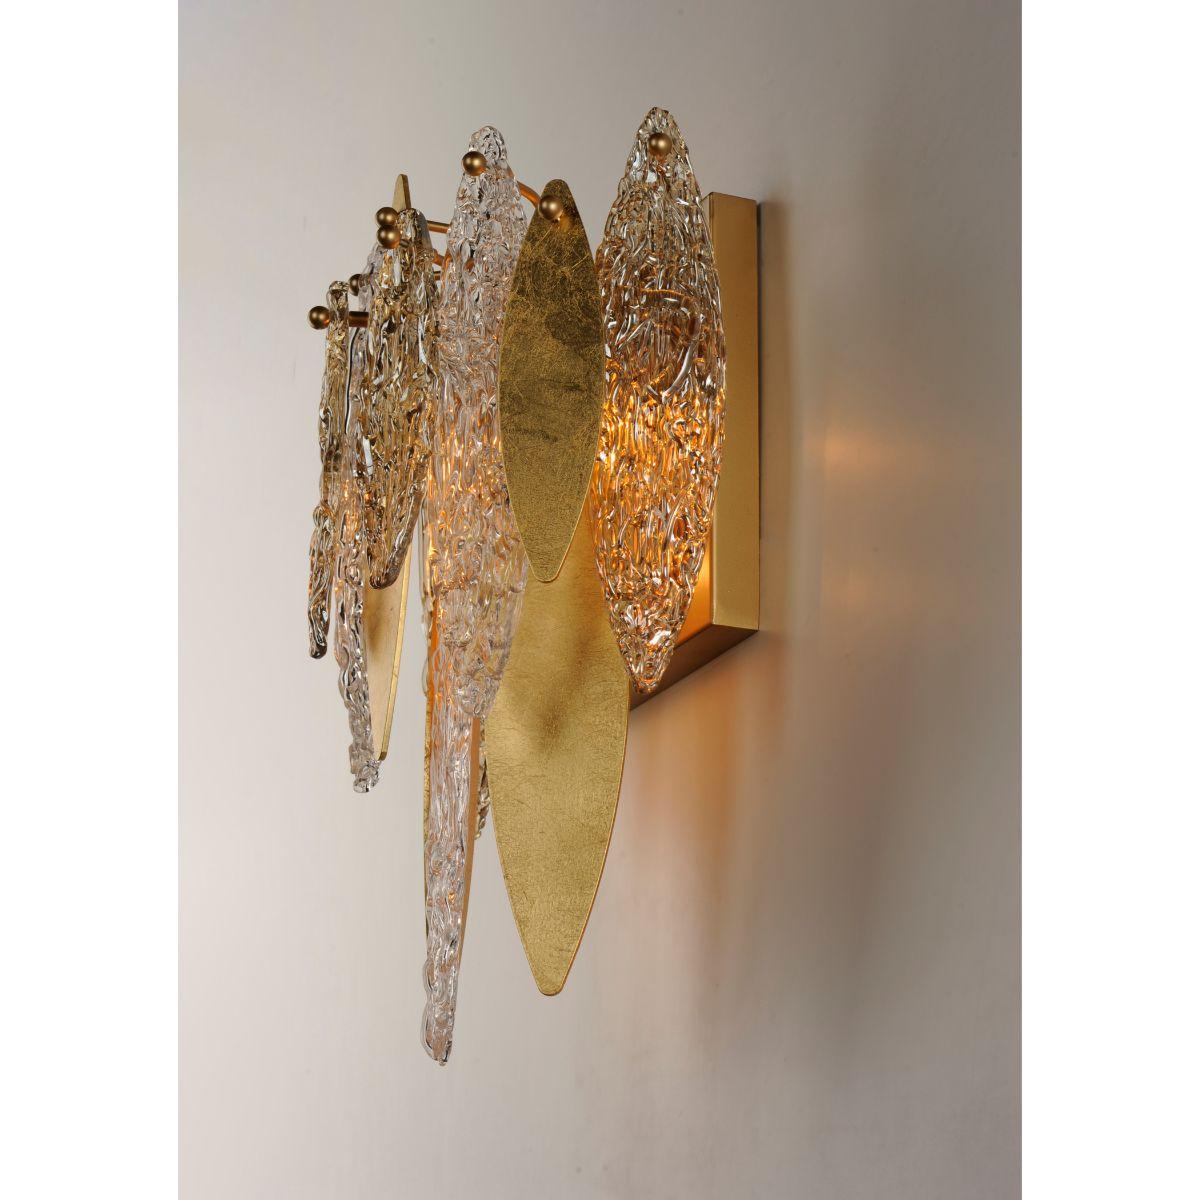 Majestic 18 in. Flush Mount Sconce Gold Finish